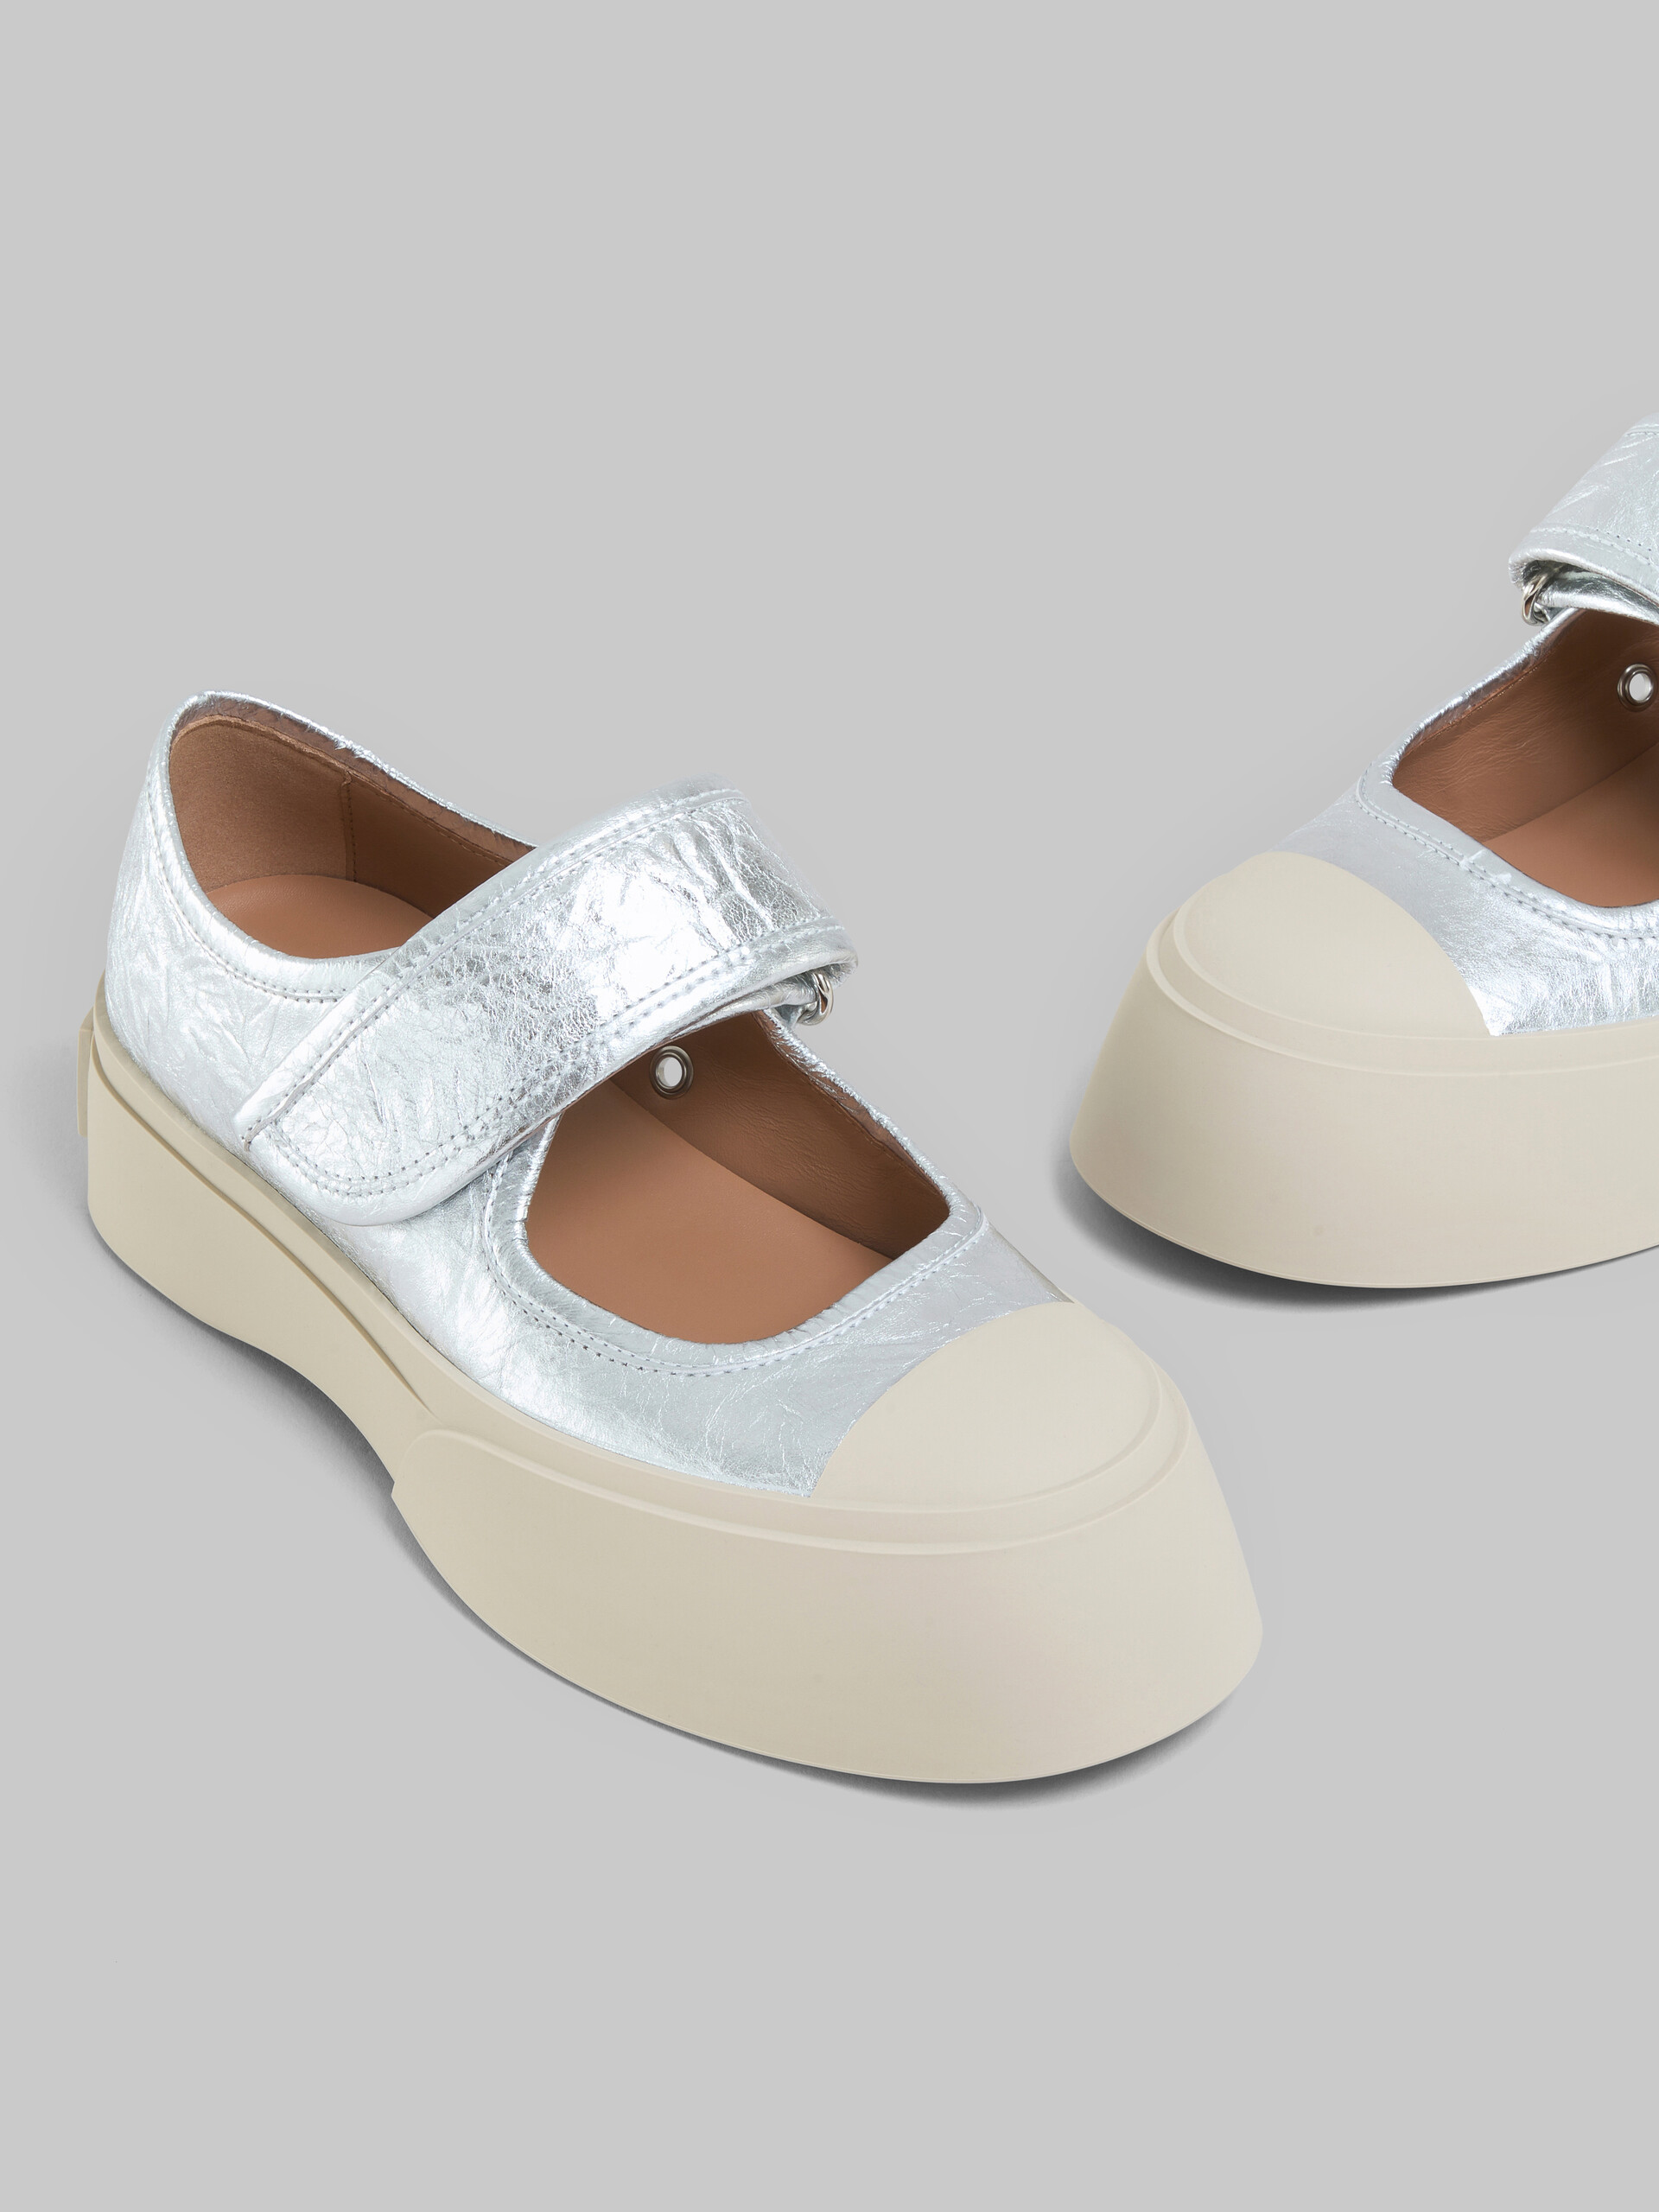 Silver leather Mary Jane sneaker - Sneakers - Image 5